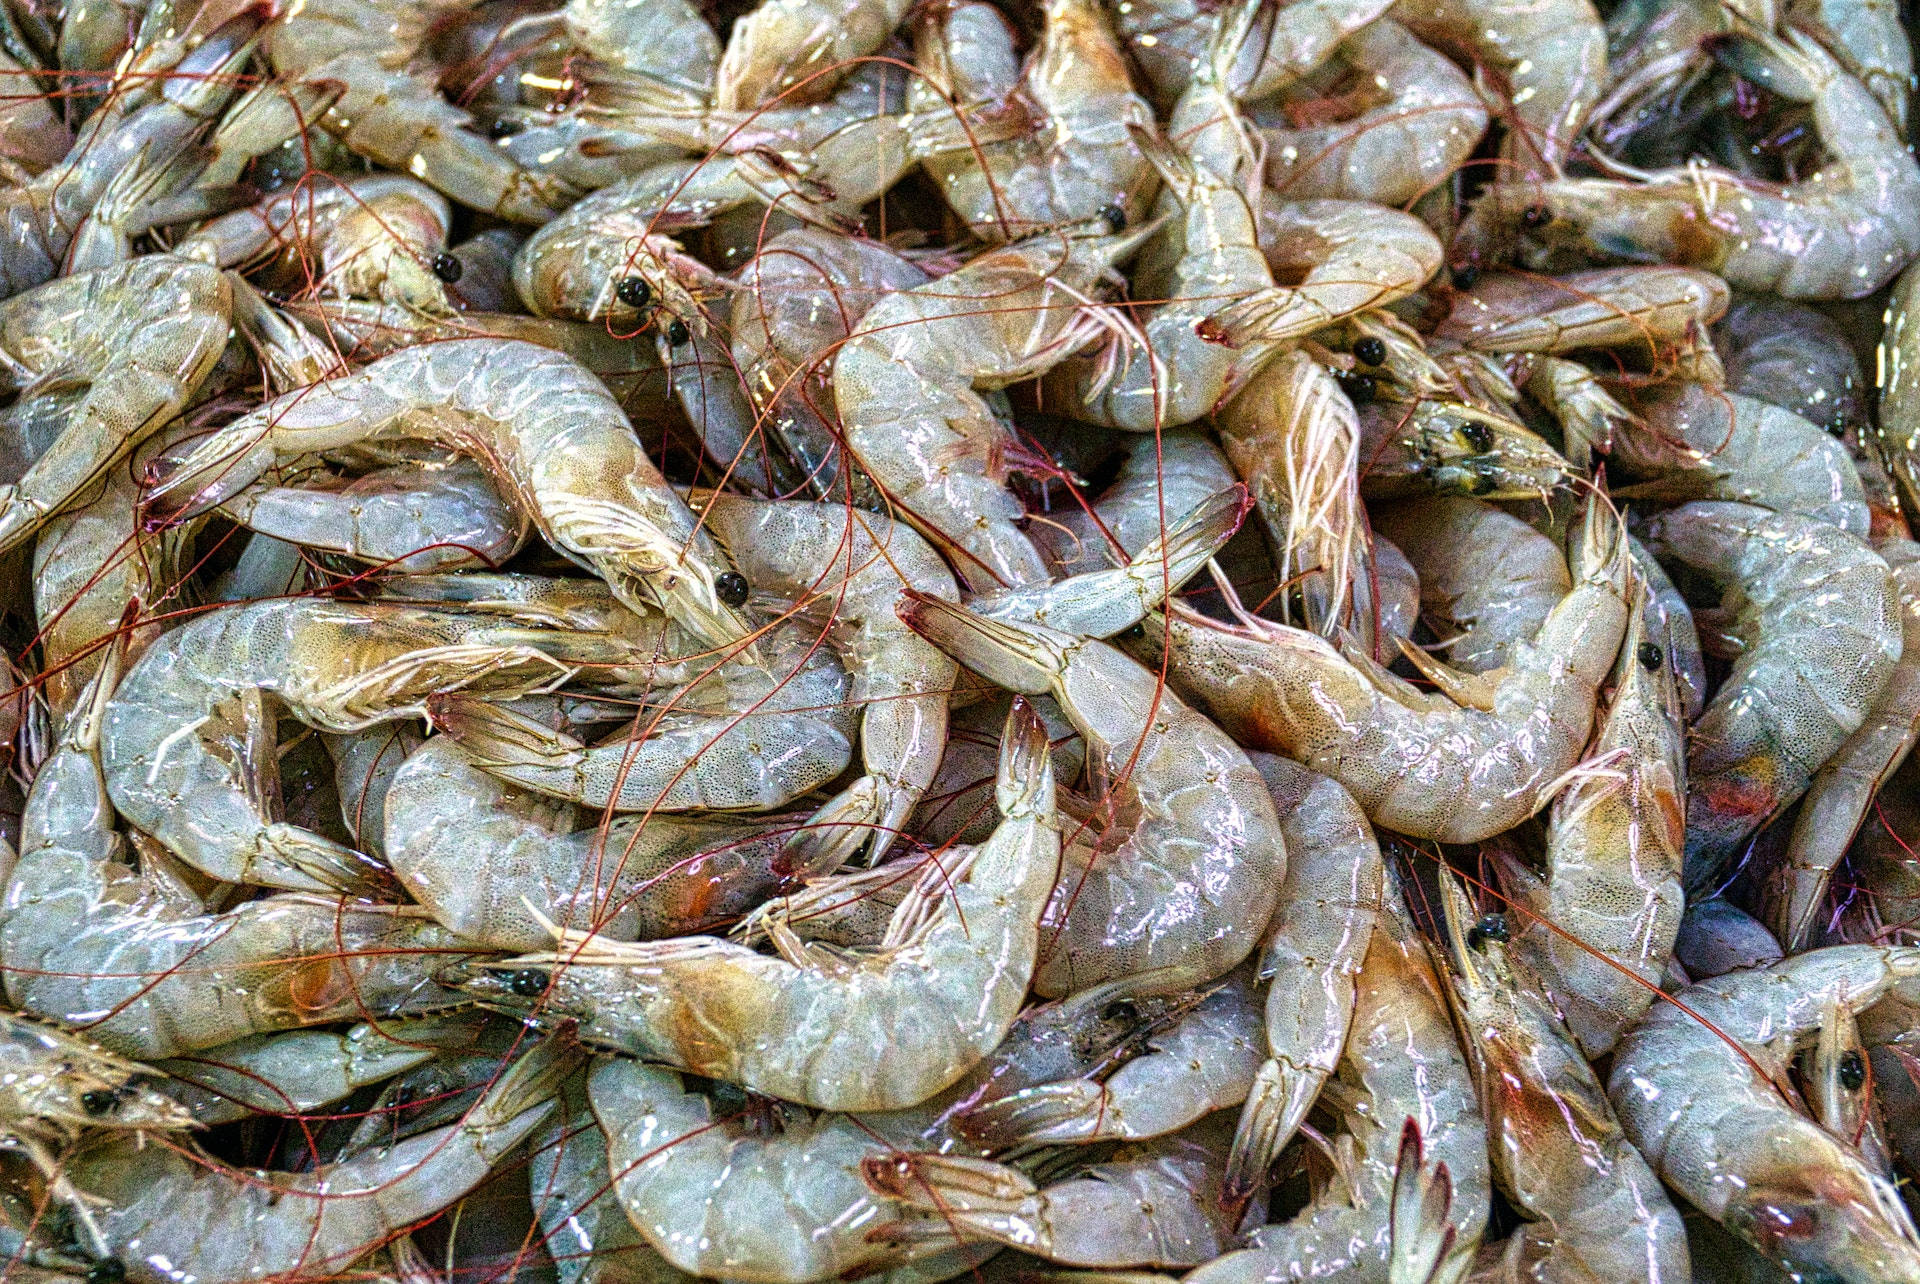 Prawns Freshly Harvested With Grey Bodies Wallpaper